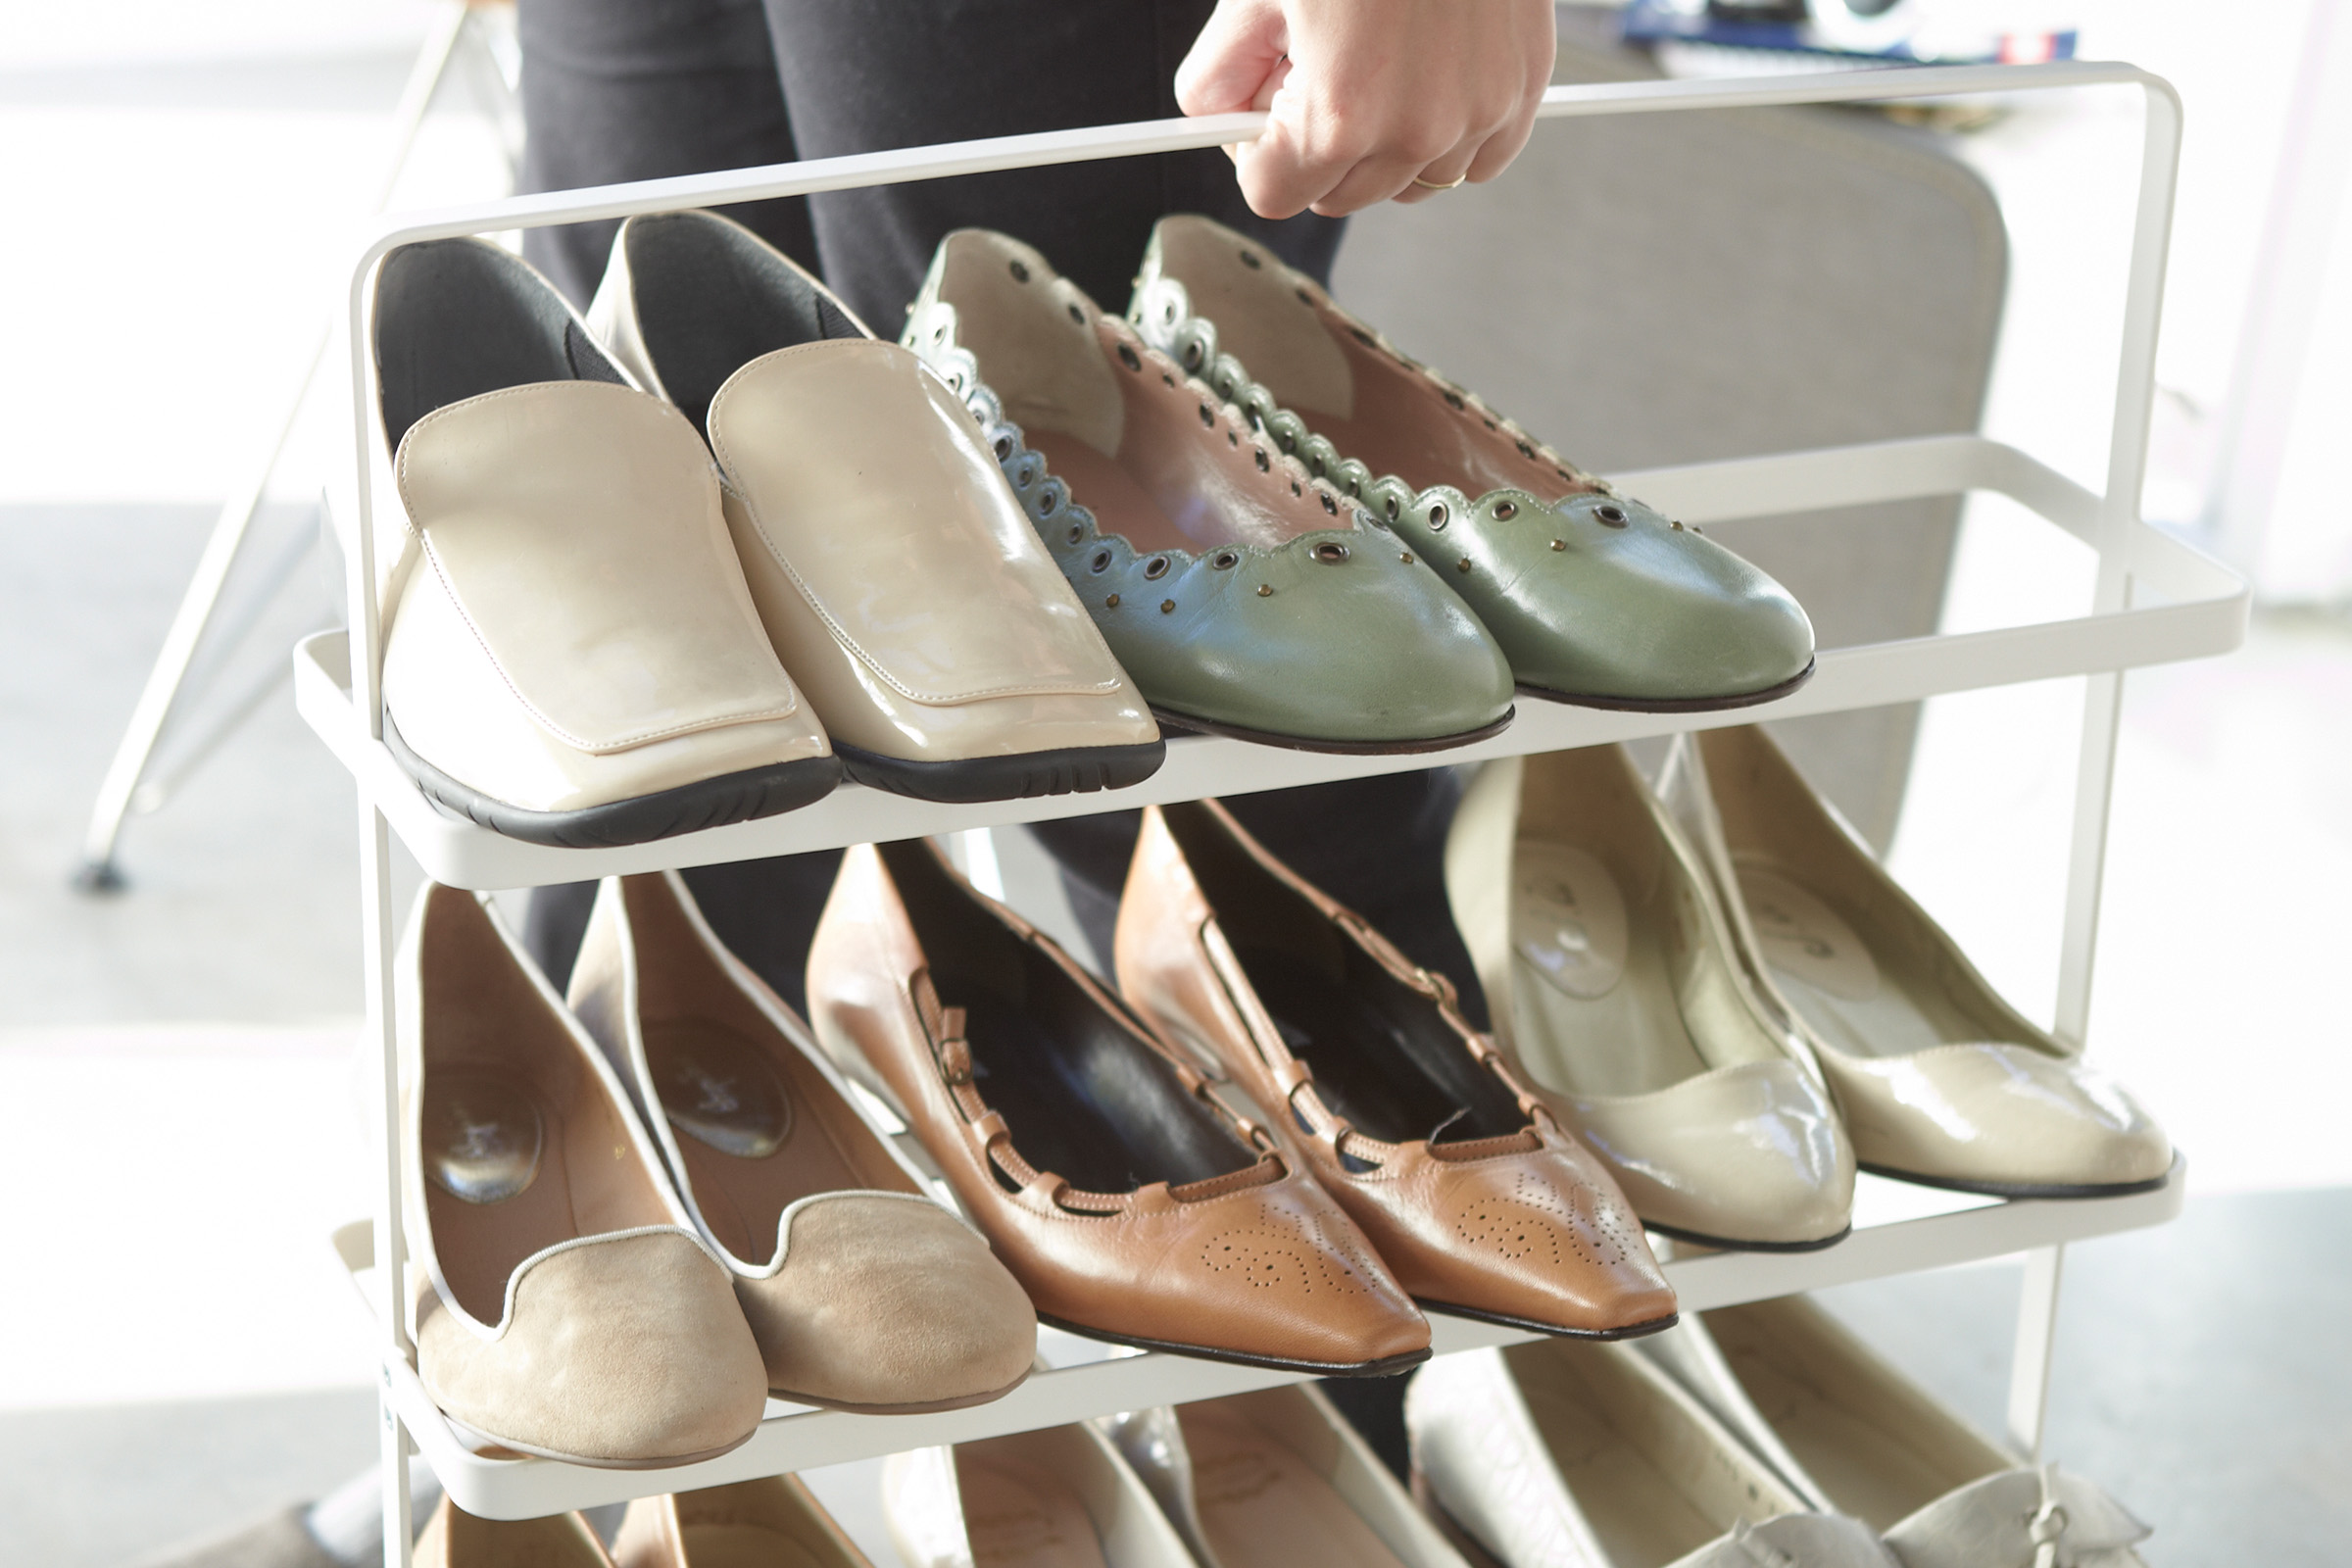 A hand lifting the Shoe Rack by Yamazaki Home in white containing multiple pairs of shoes.